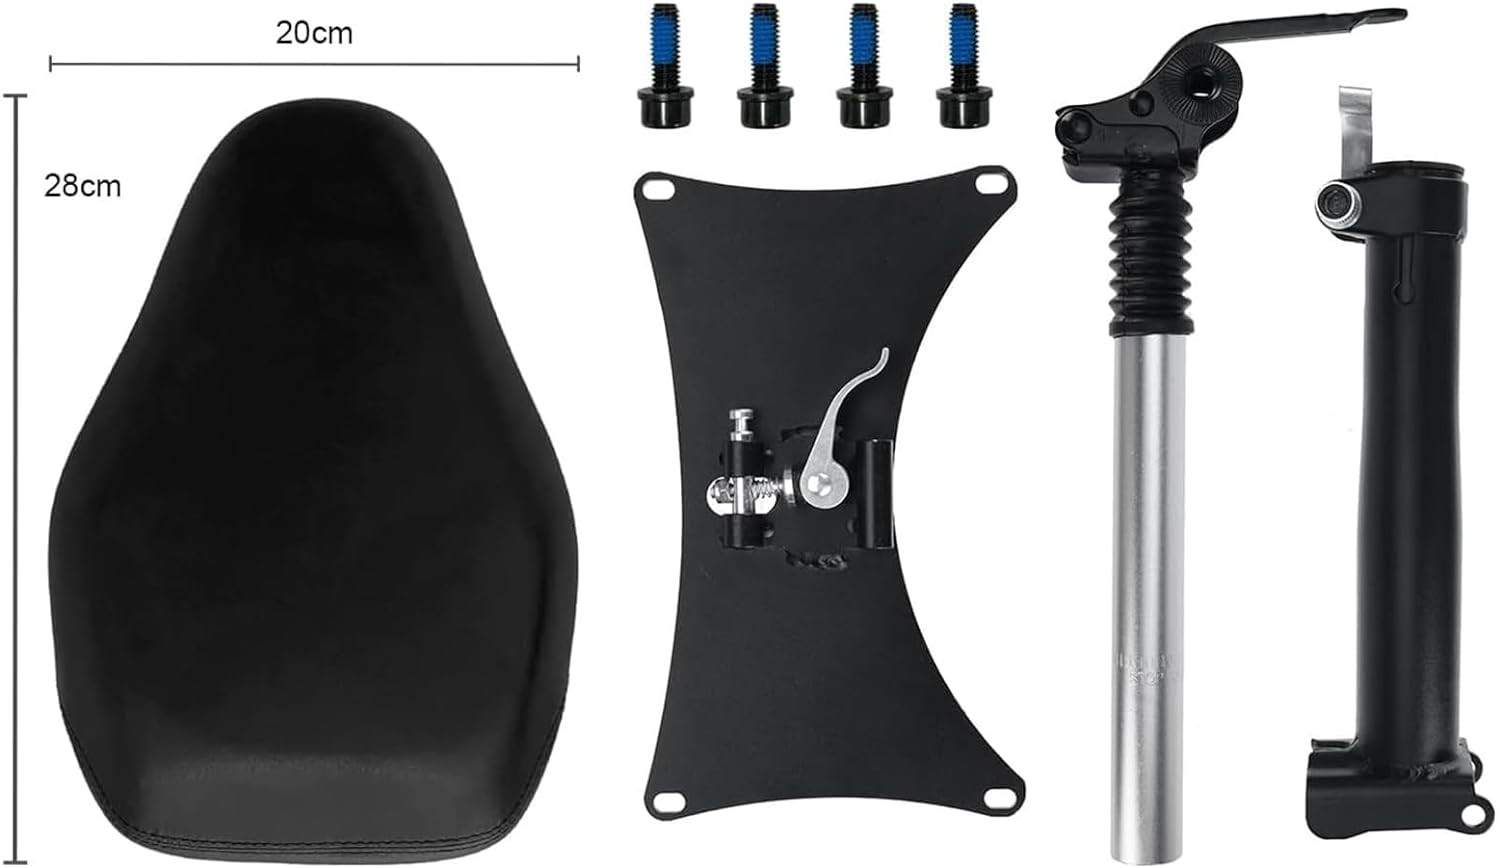 Electric Scooter Accessories Saddle Seat Height Adjustable